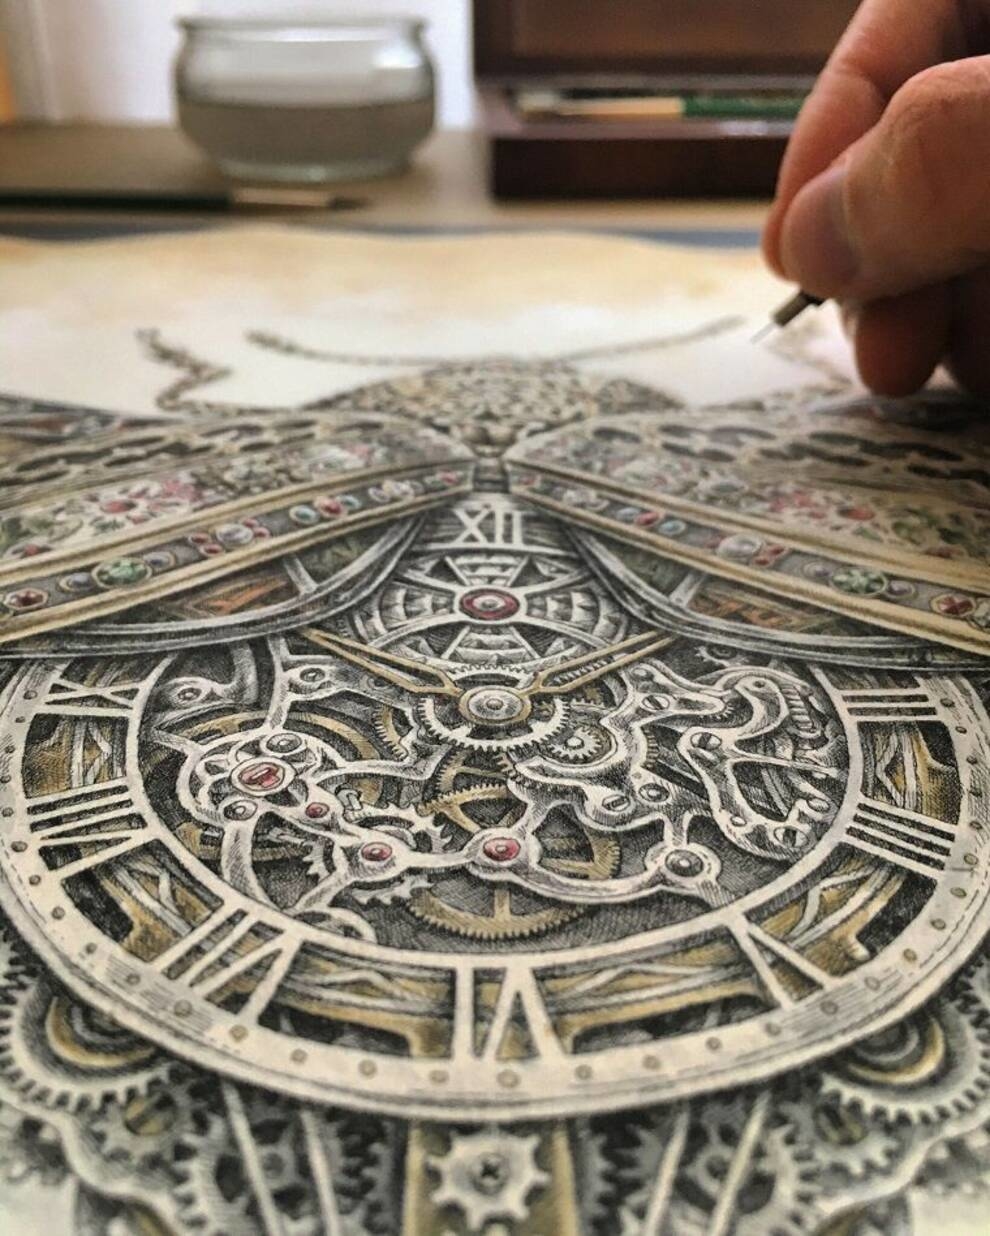 High precision and detail - original paintings by an artist from France (Video)